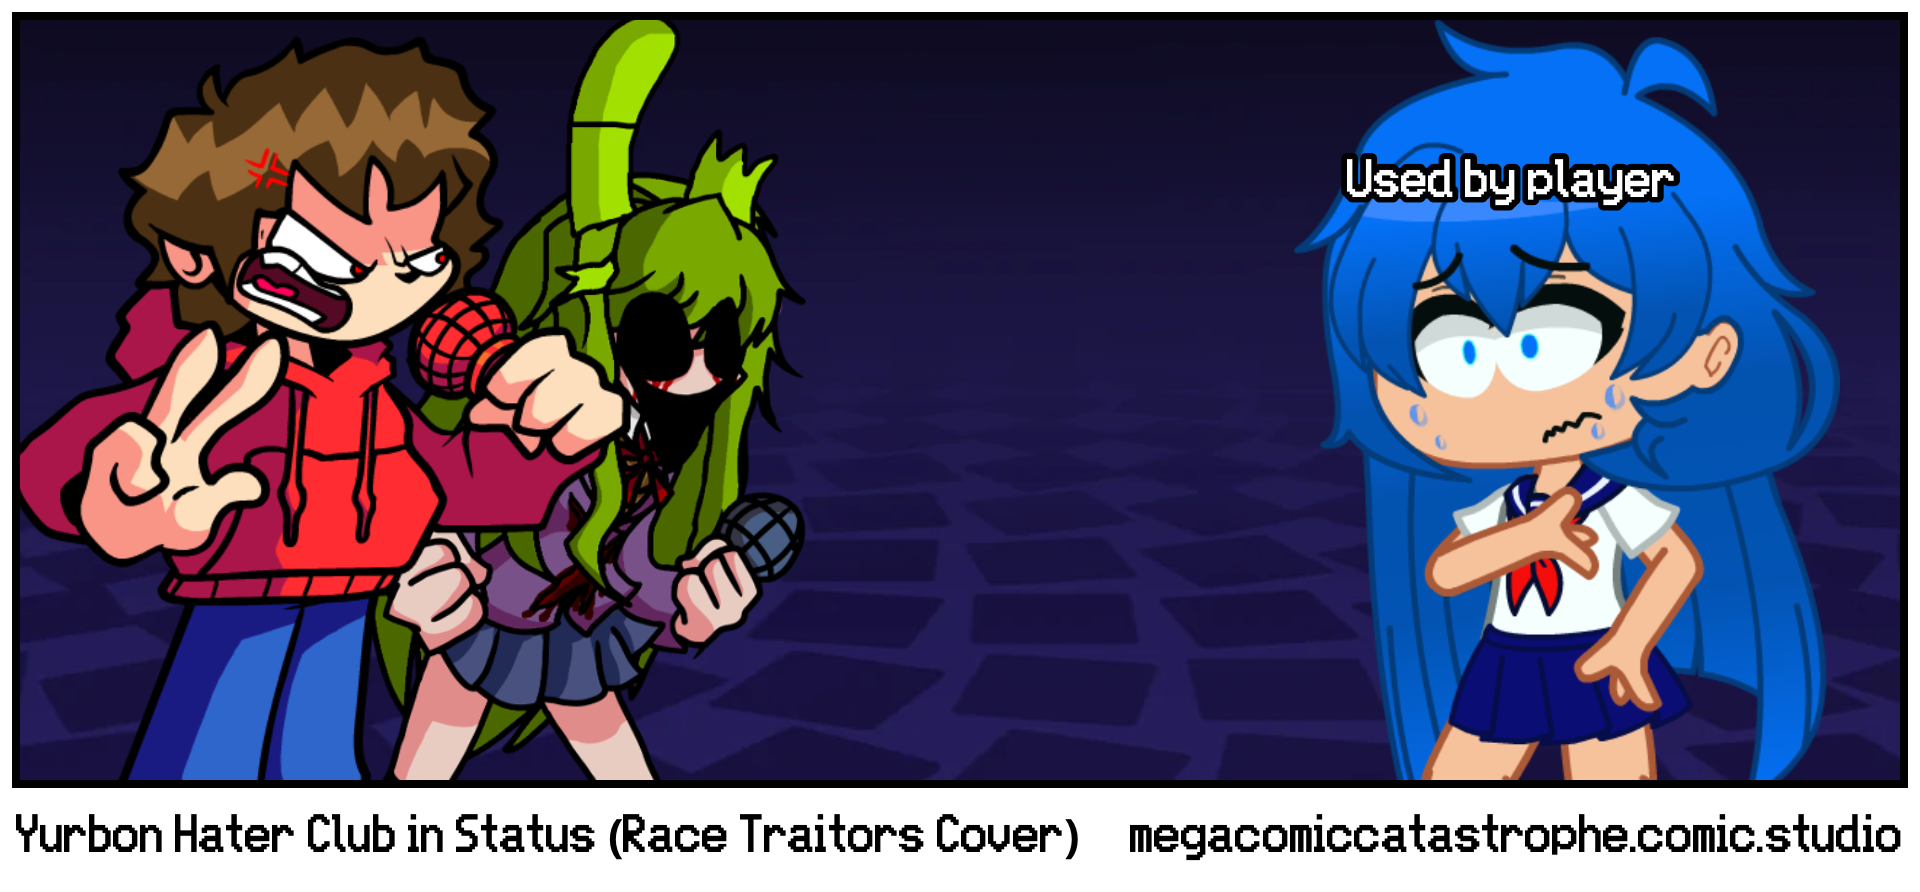 Yurbon Hater Club in Status (Race Traitors Cover)